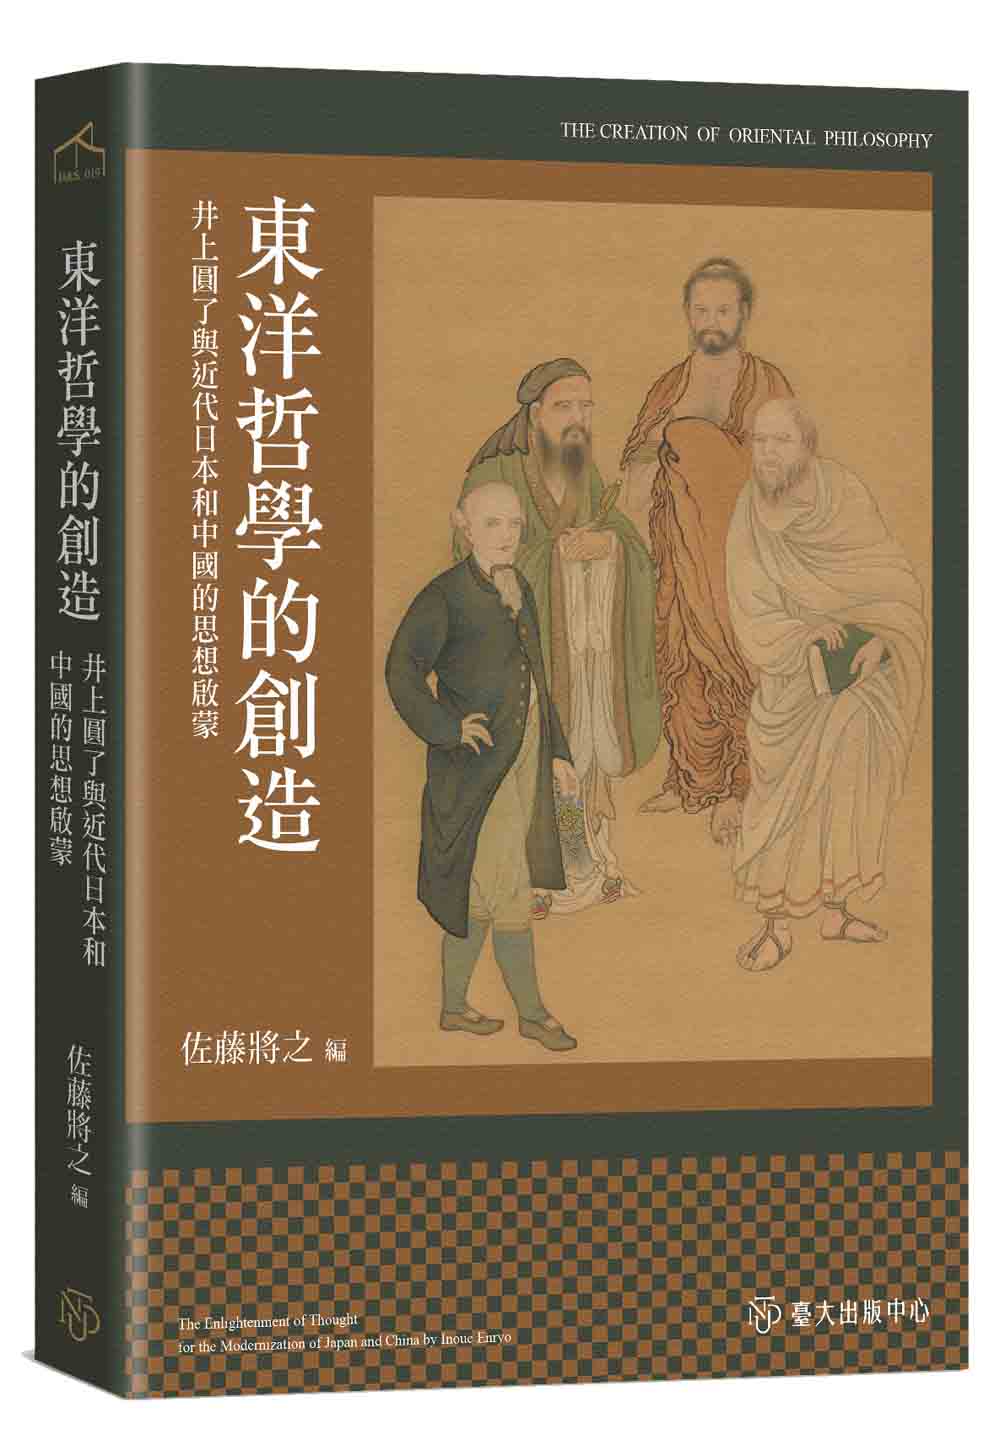 The Creation of Oriental Philosophy: The Enlightenment of Thought for the Modernization of Japan and China by Inoue Enryo